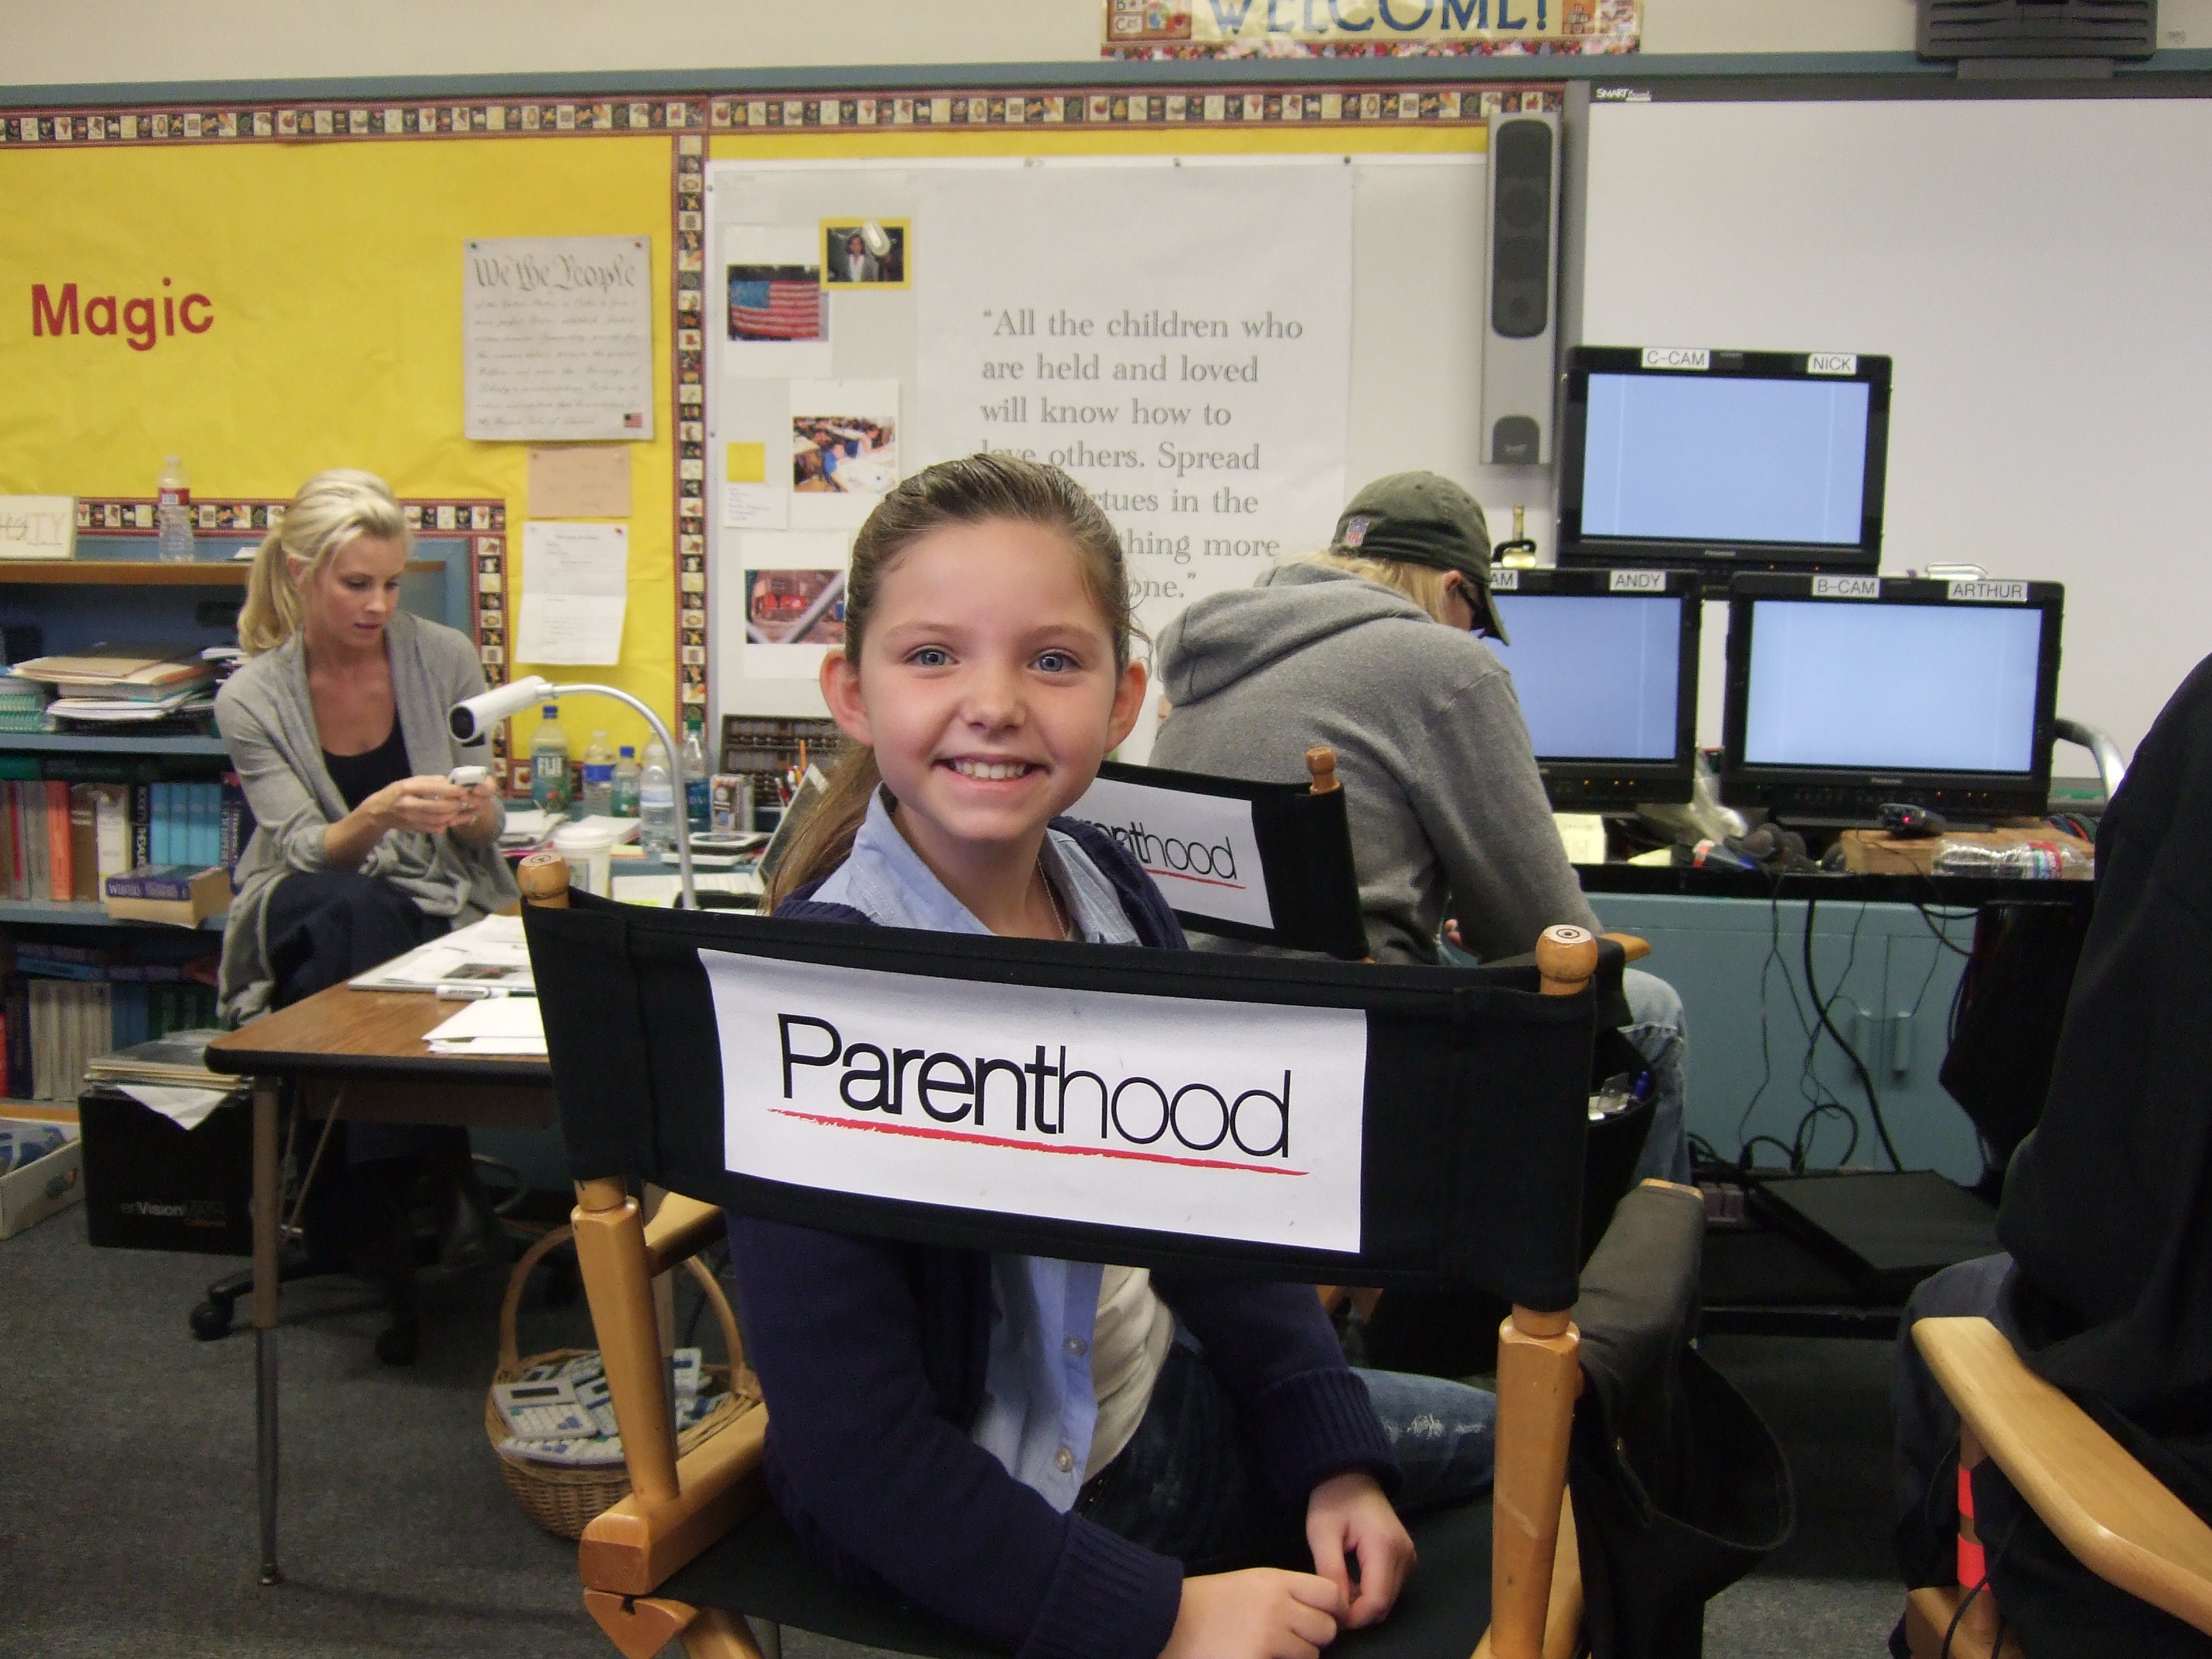 Chloe on location with Parenthood.